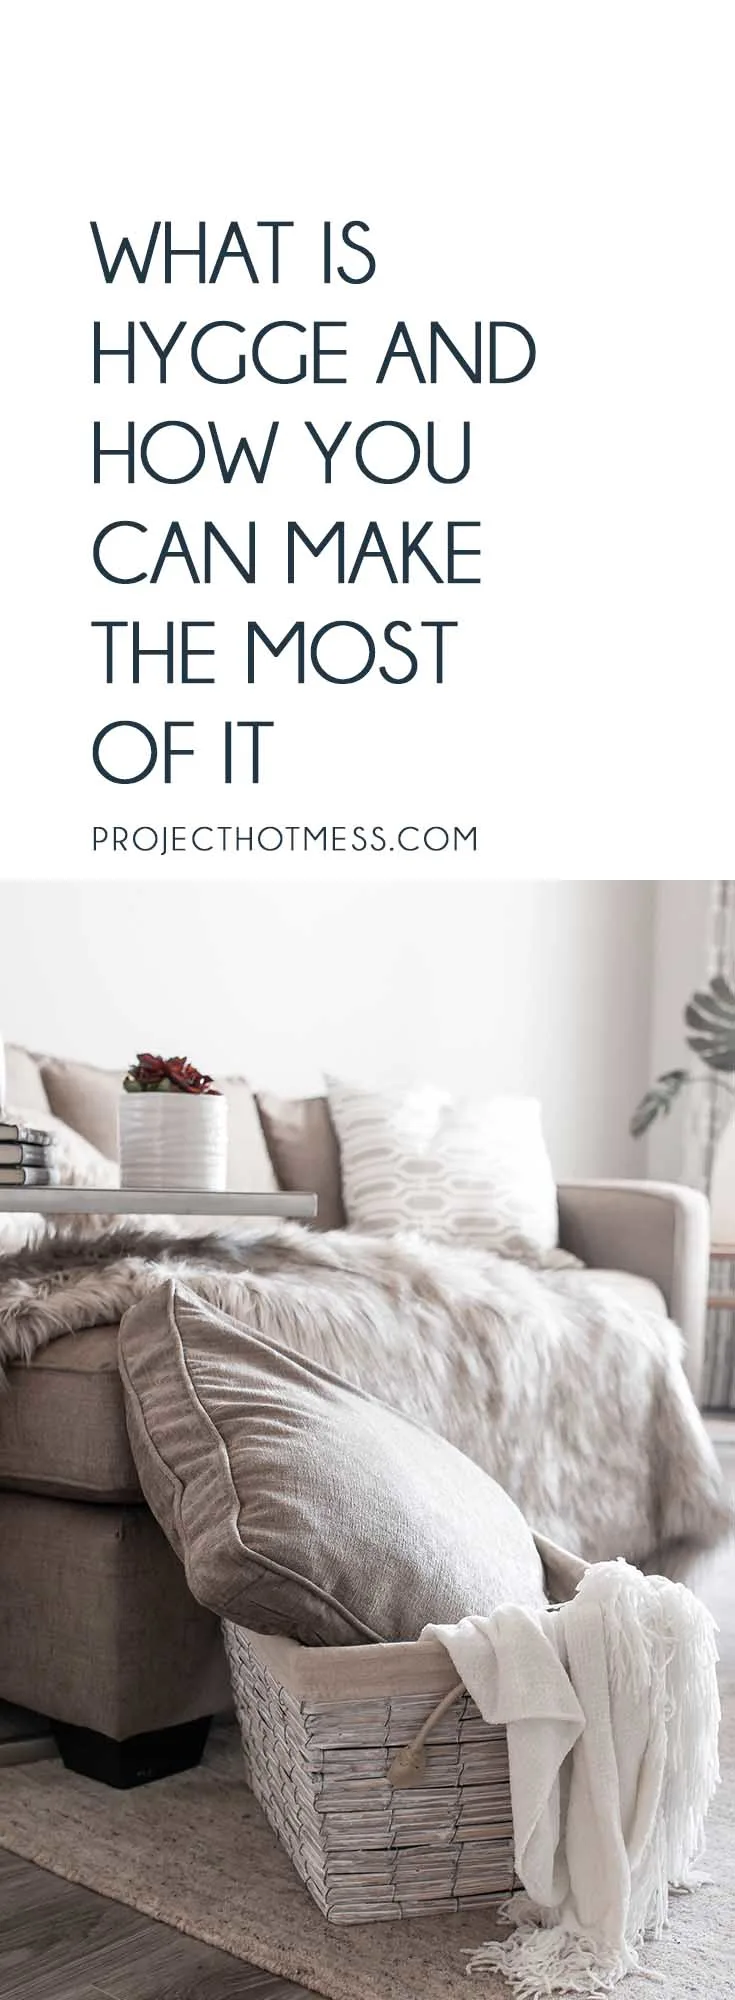 The concept of Hygge is everywhere at the moment, especially on Pinterest. But what is Hygge? And how can you add it into your life? Read on to find out how to make it part of your lifestyle, during any time of the year. Hygge | Hygge Home | Hygge Decor | Hygge Inspiration | Hygge Summer | Hygge Lifestyle | Hygge Bedroom | Hygge Ideas | Hygge Living Room | Hygge Spaces